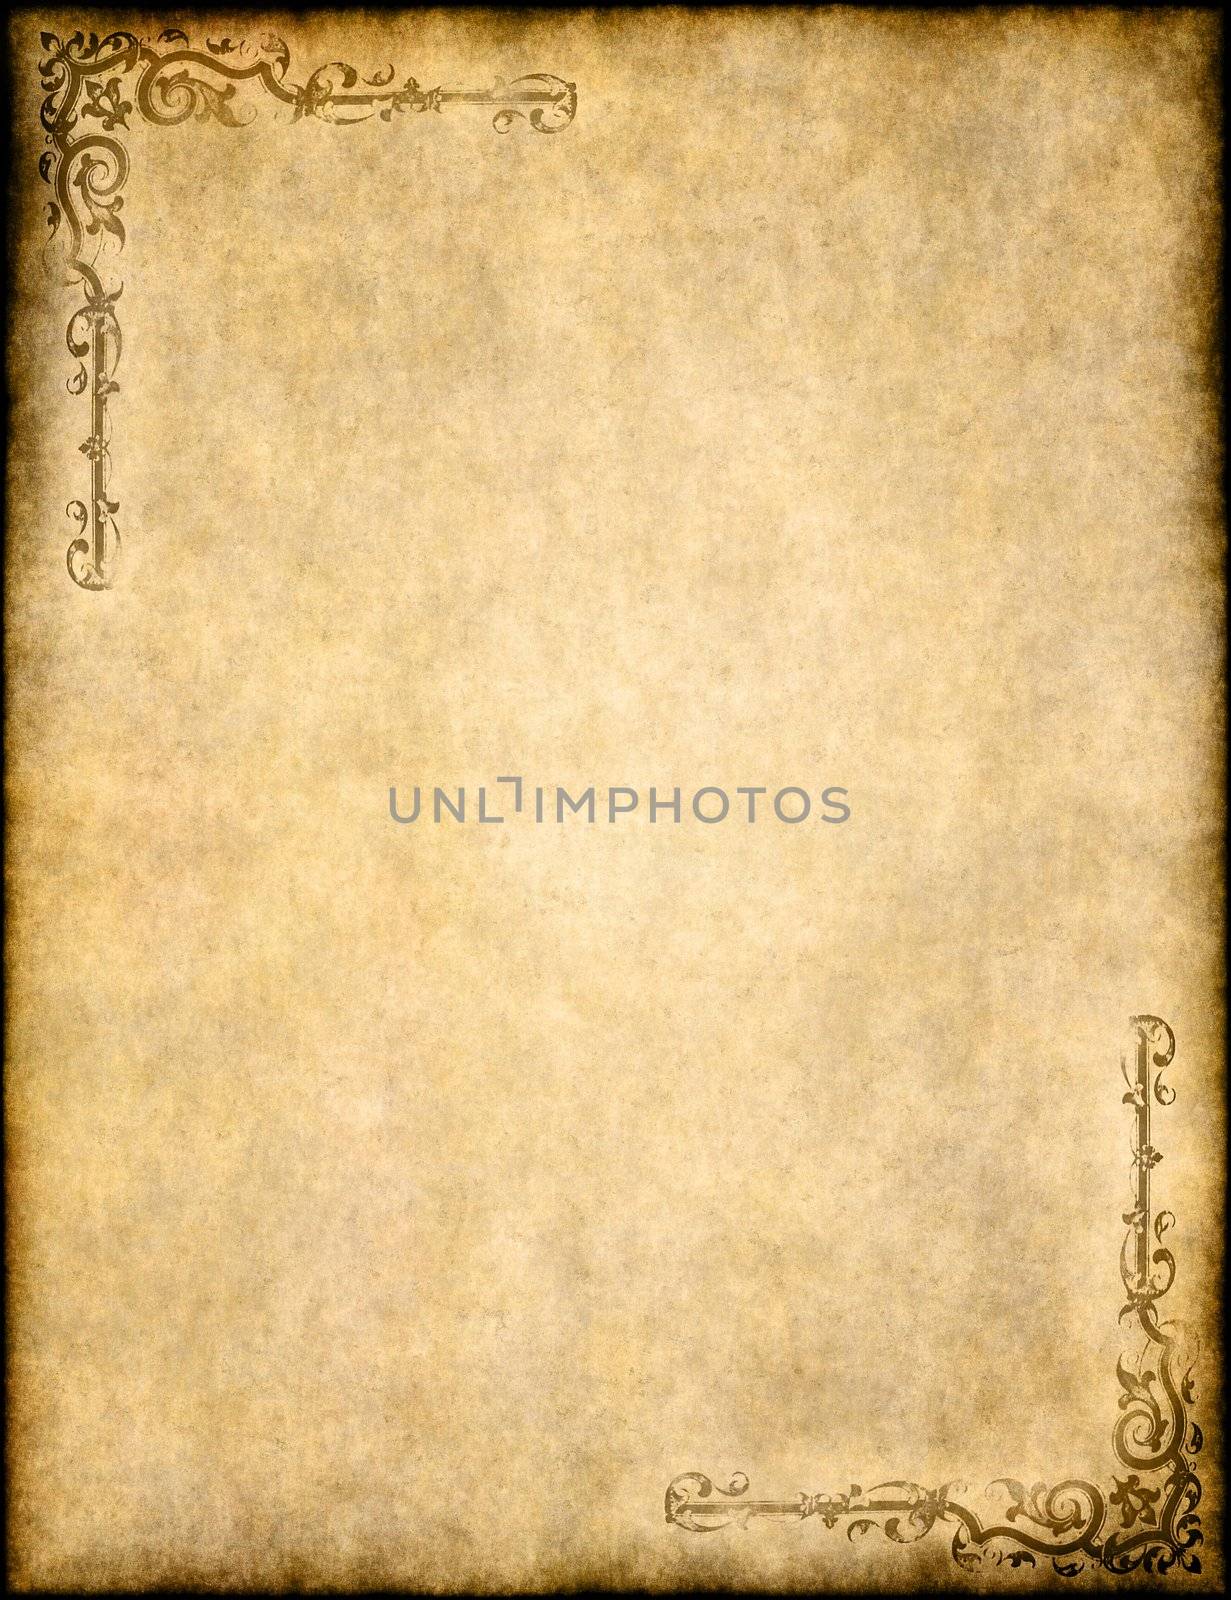 great background of old parchment paper texture with ornate design